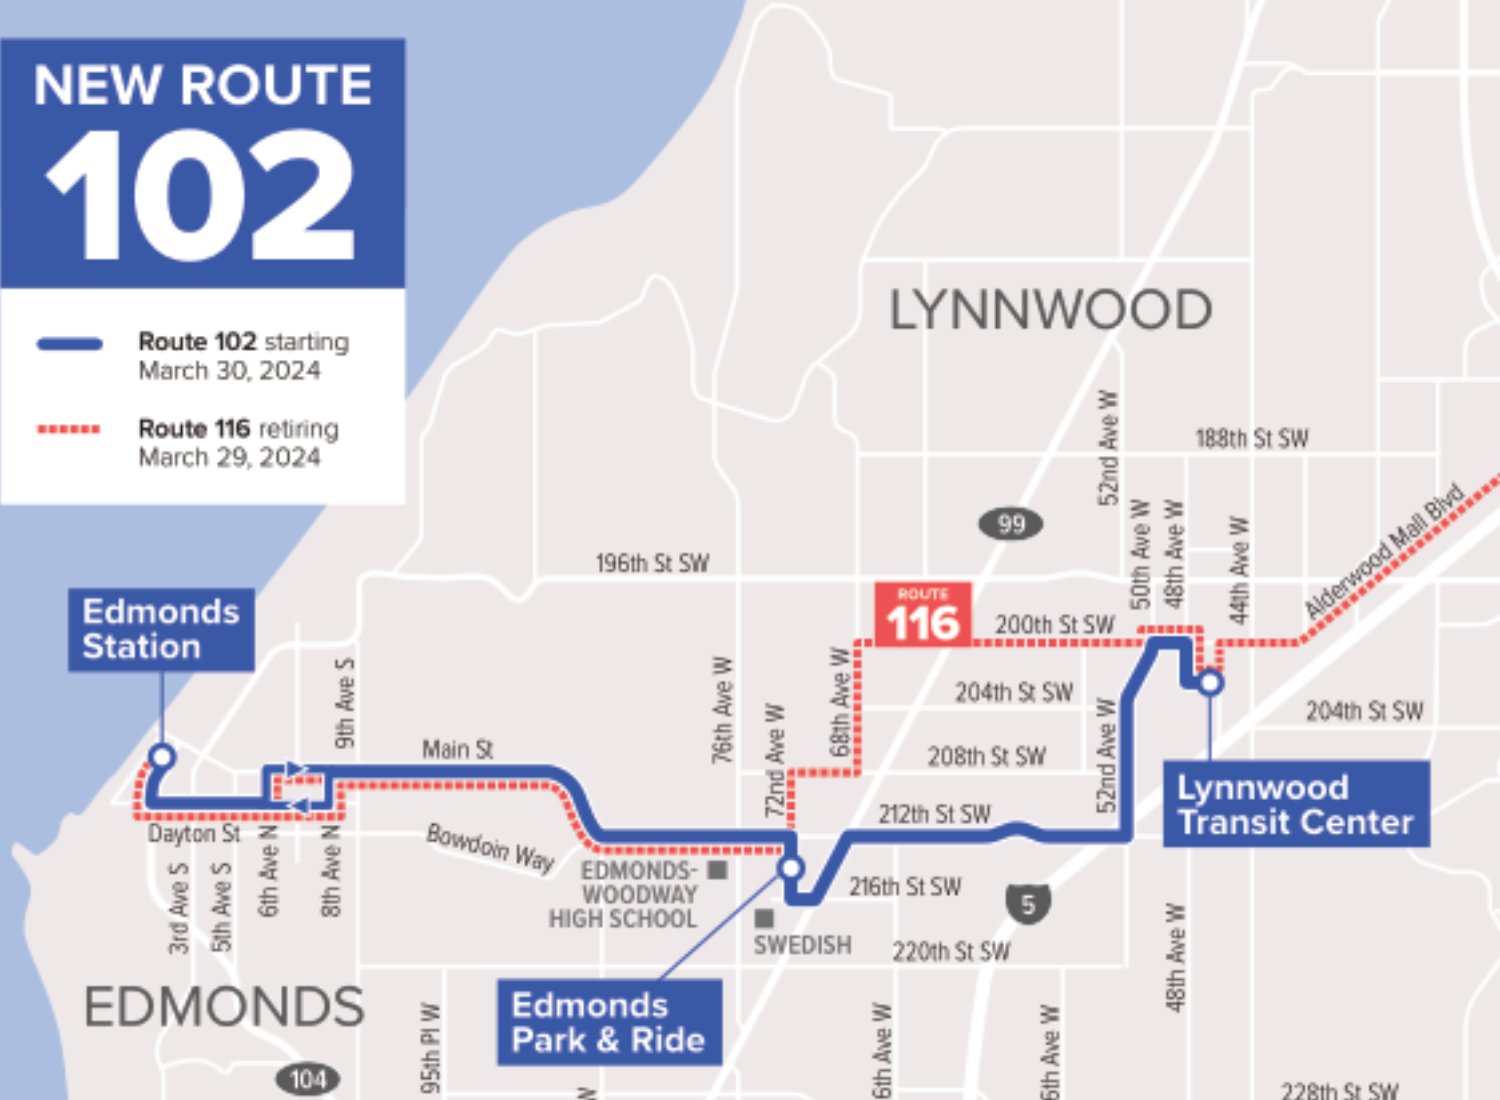 A map of new route 102